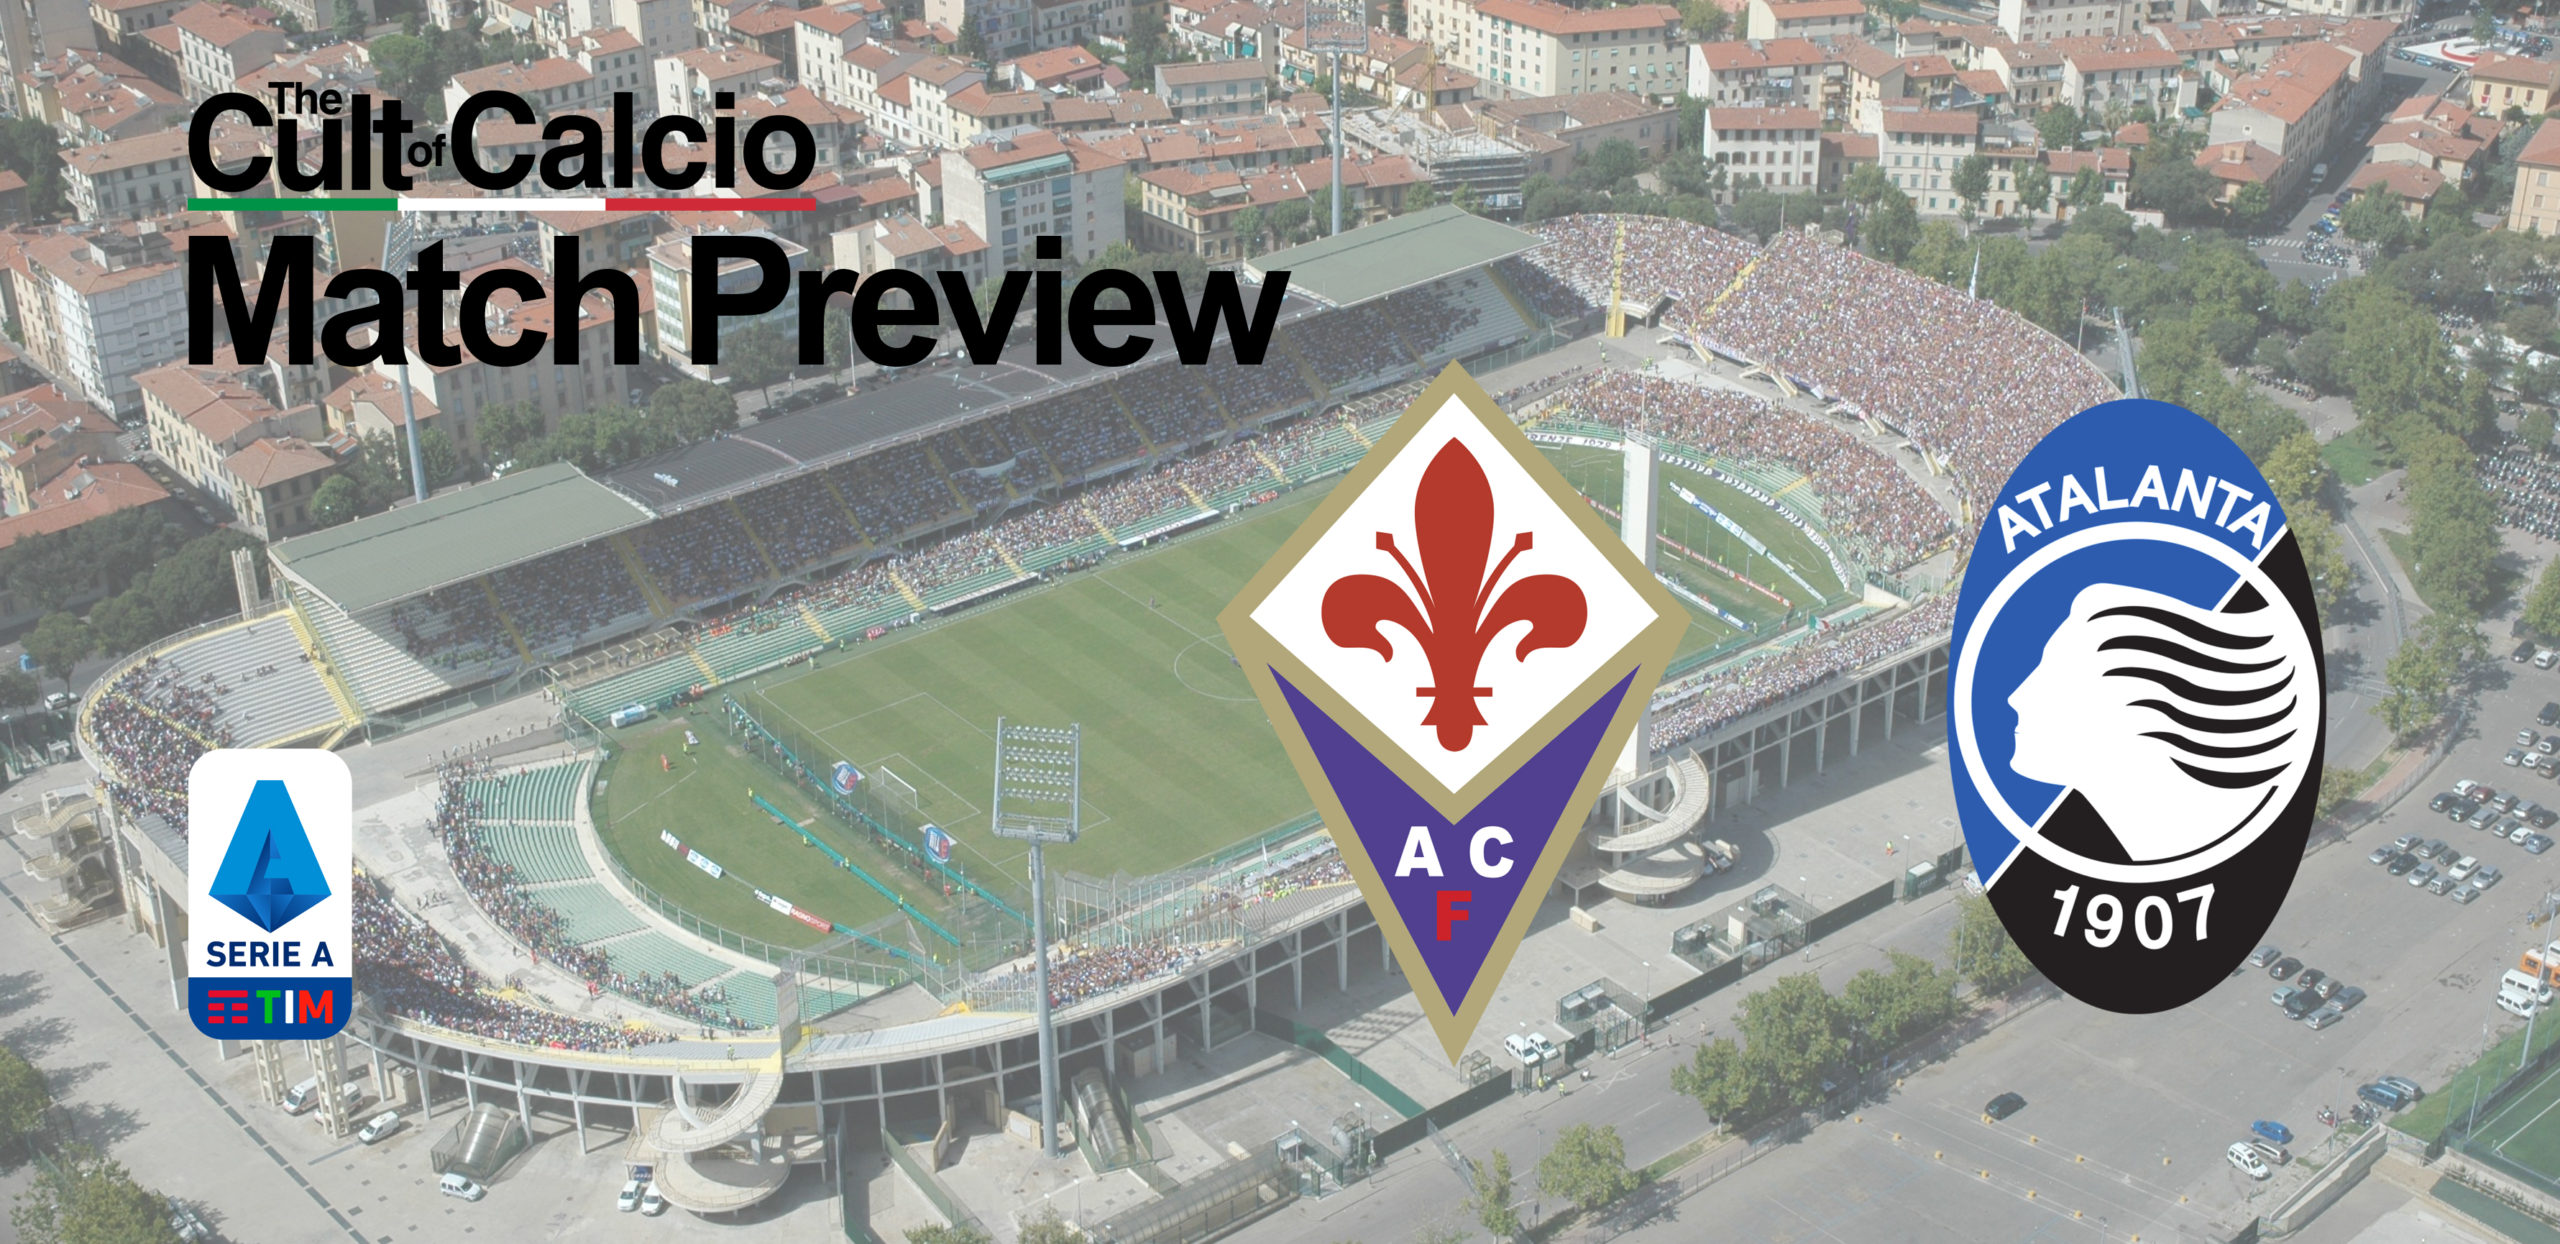 Cult of Calcio previews the Premier League game between Fiorentina vs Atalanta as well as prediction, betting tips, odds and team news